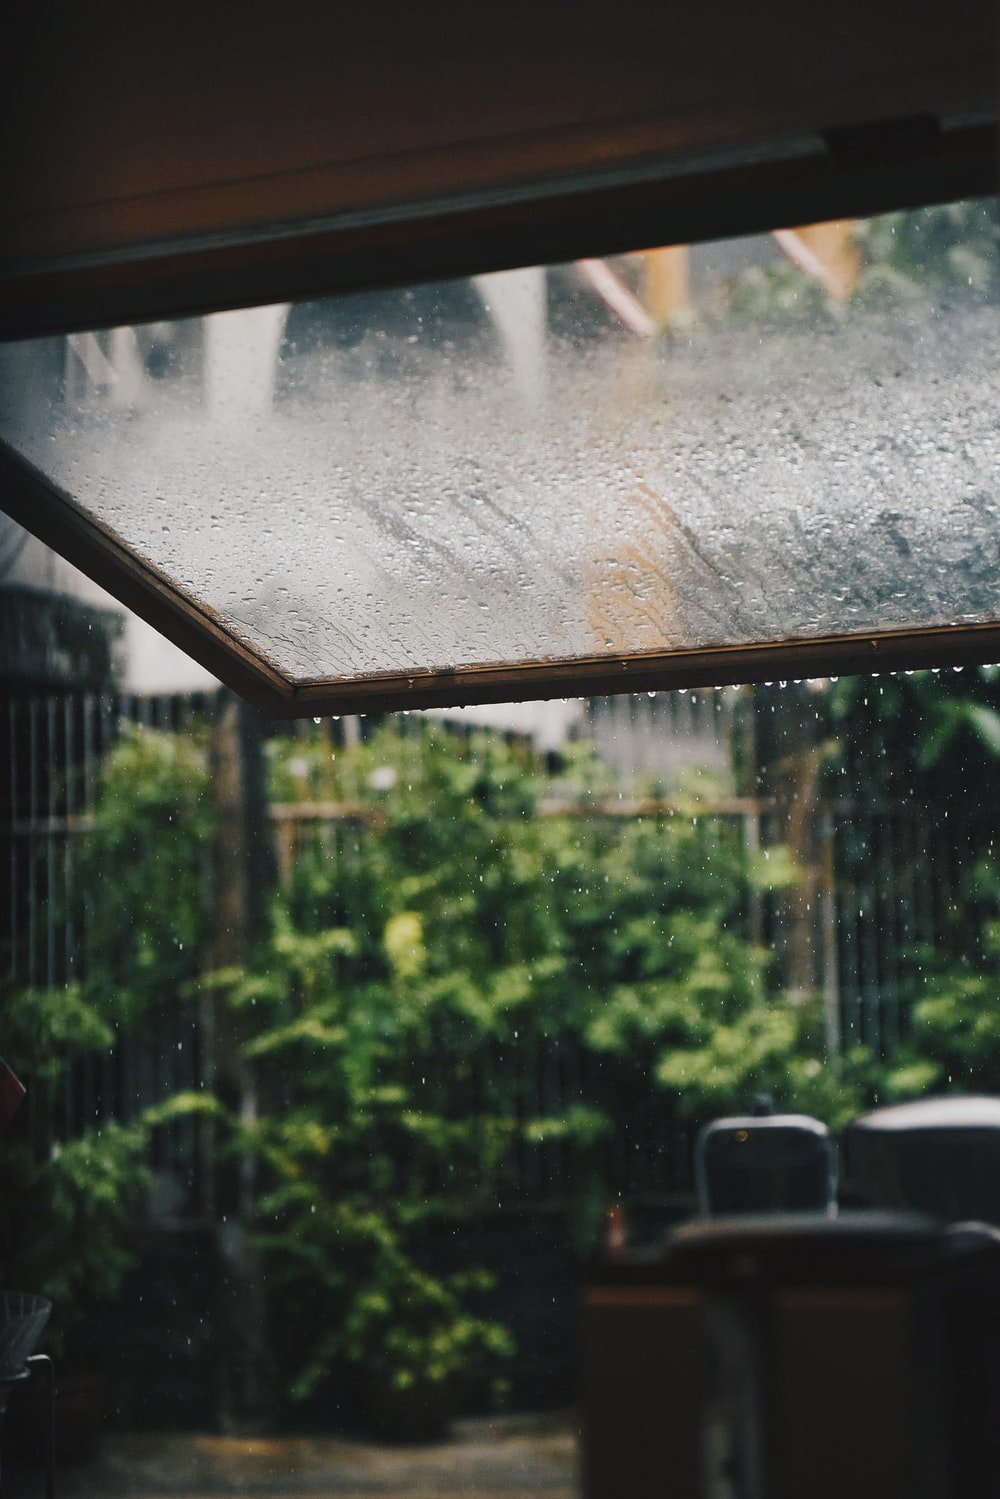 1K+ Rain On Glass Picture. Download Free Image